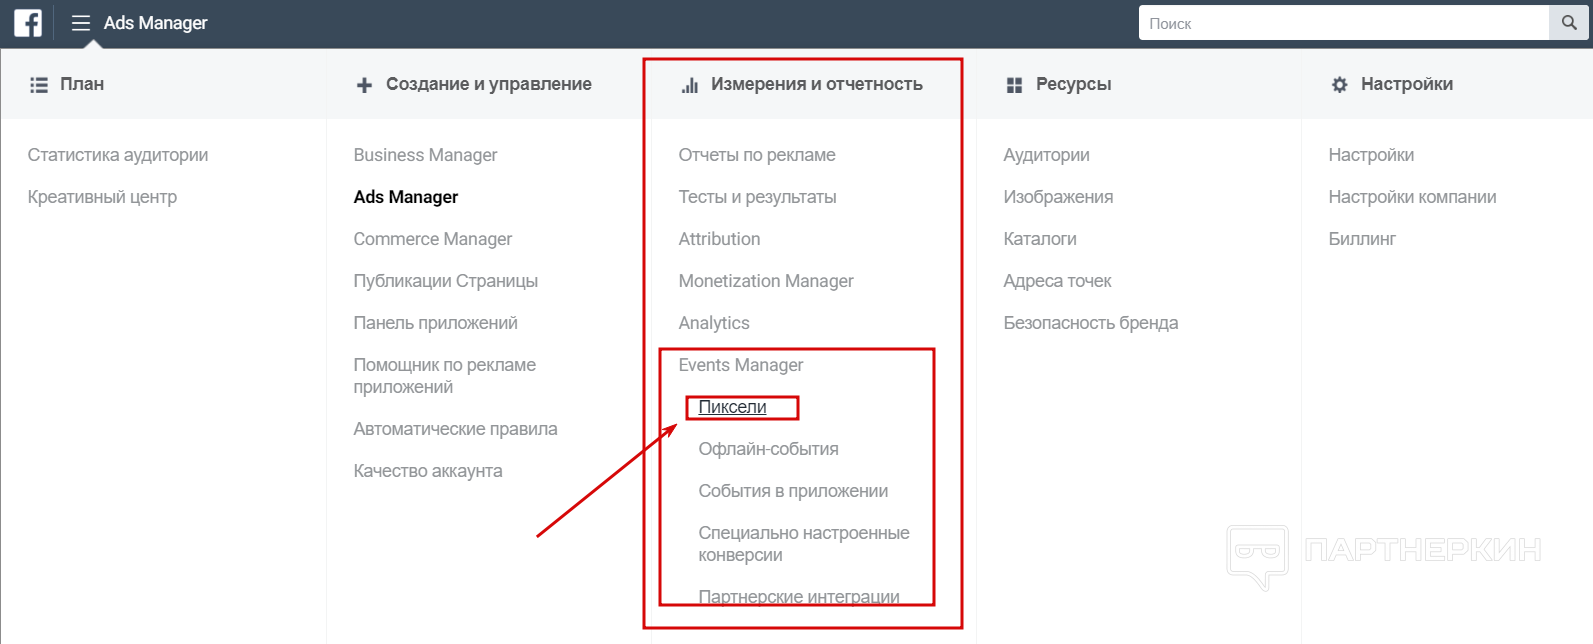 ads manager фб